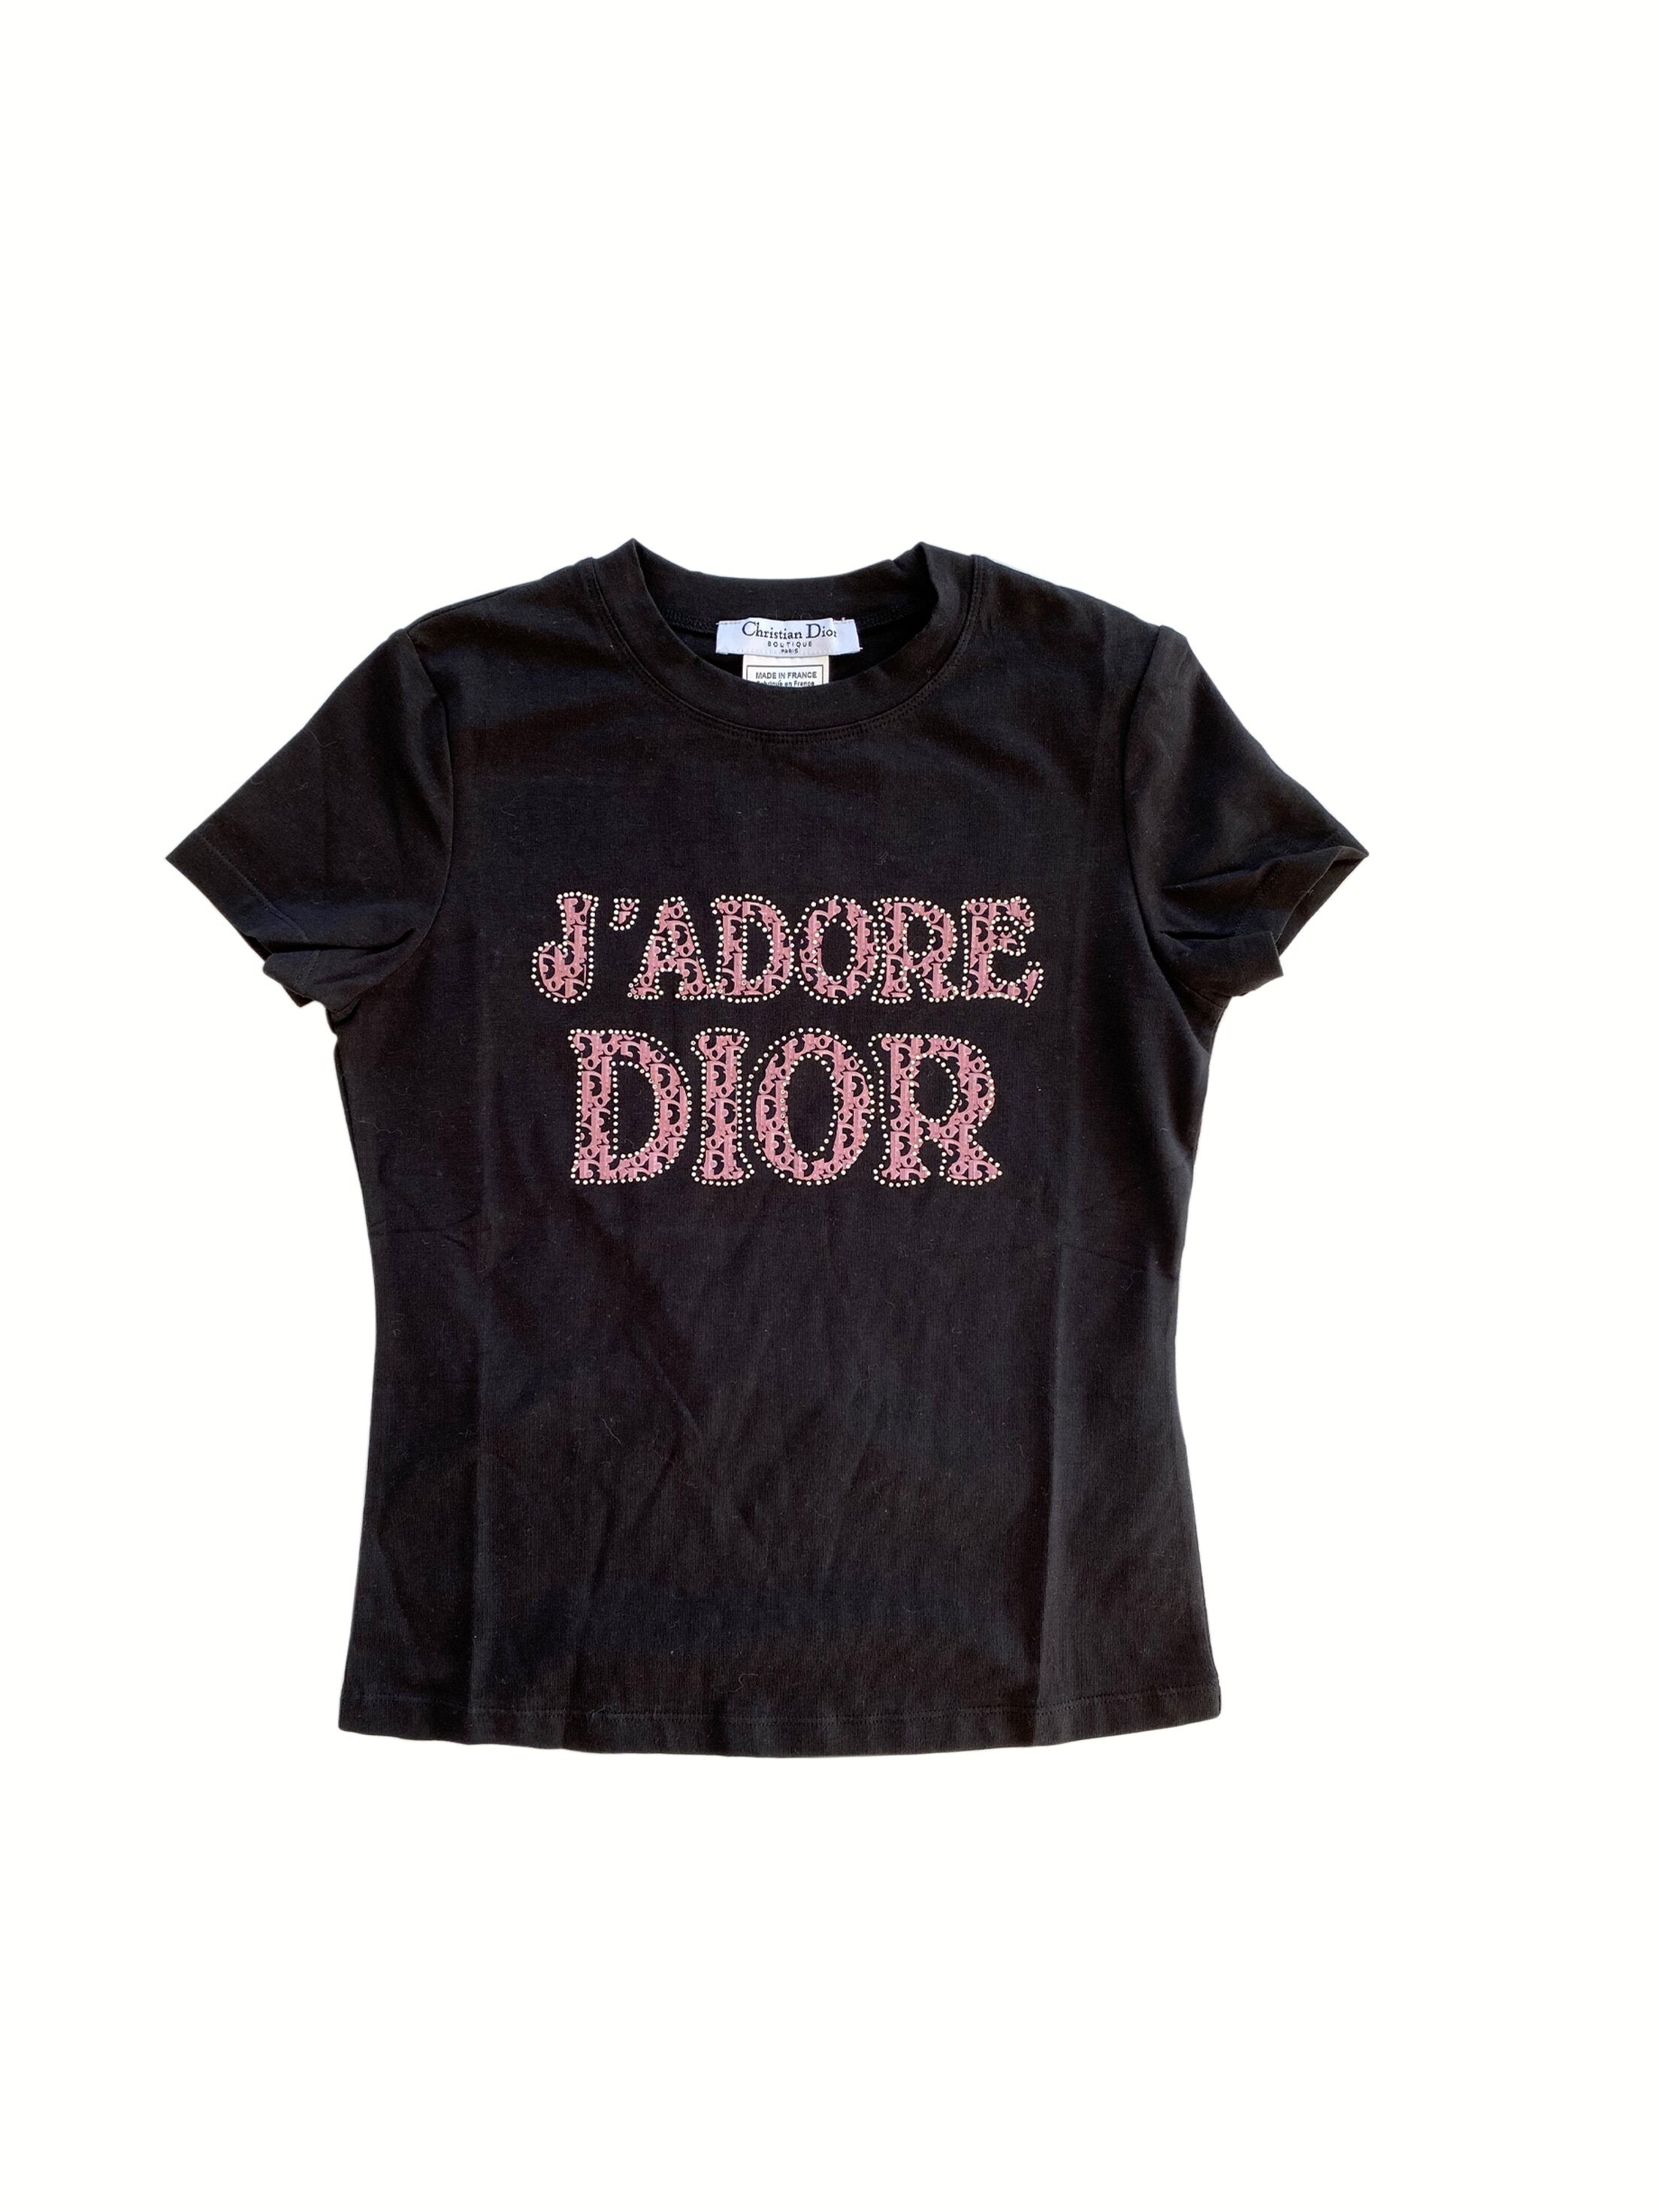 Christian Dior J'adore Pink and Black T-Shirt – Into Archive